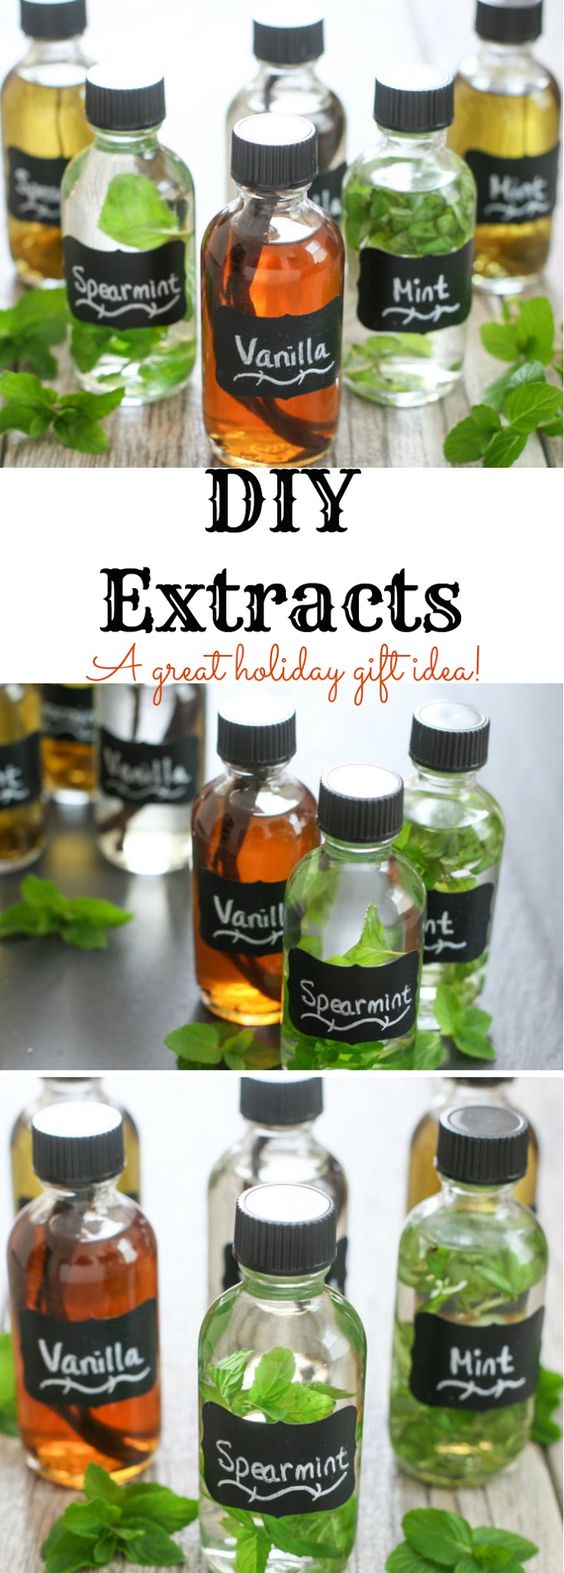 DIY Extracts. 